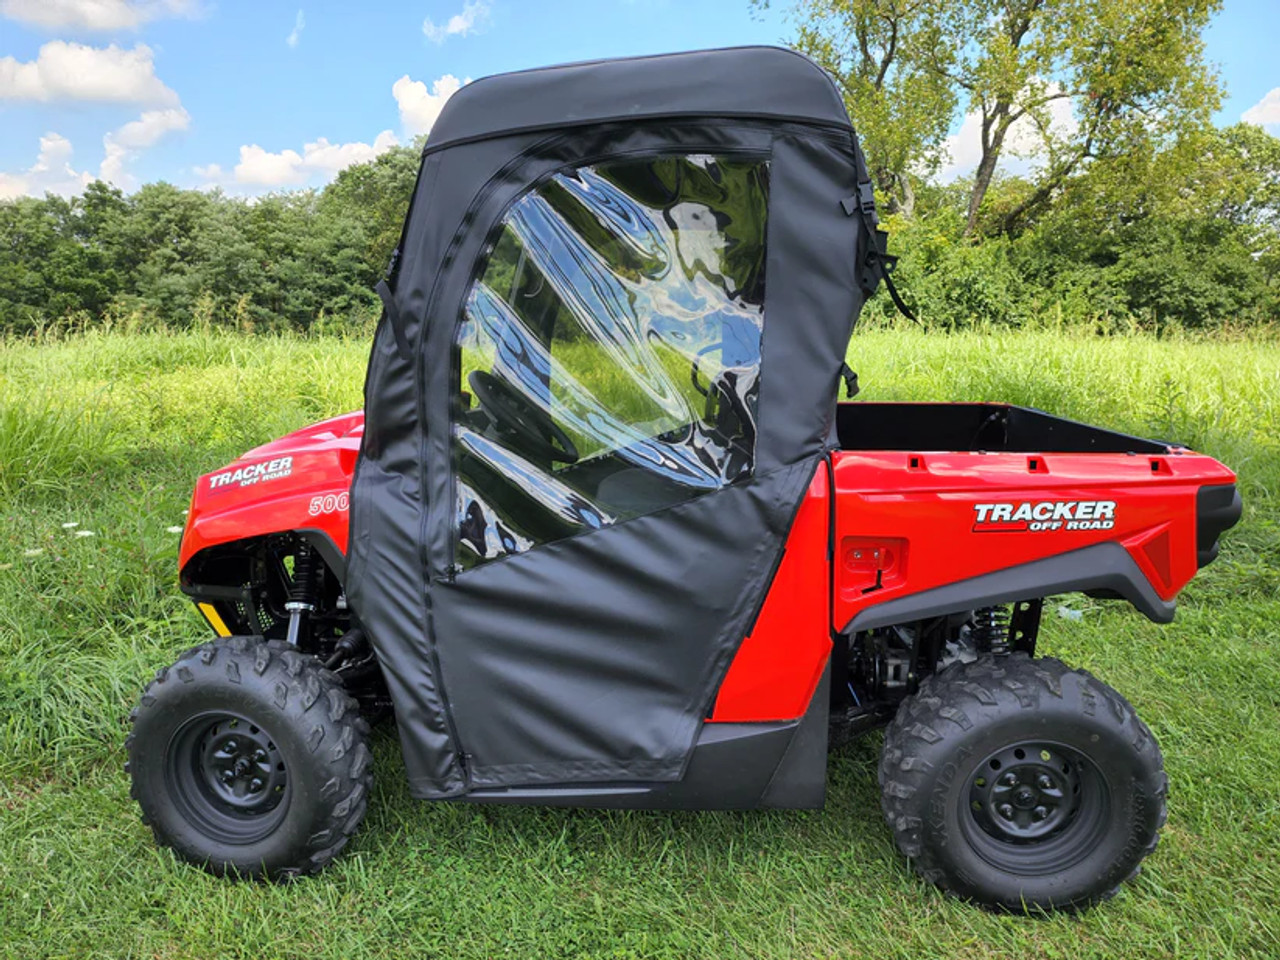 3 Star side x side Arctic Cat Prowler 500 full cab enclosure side view